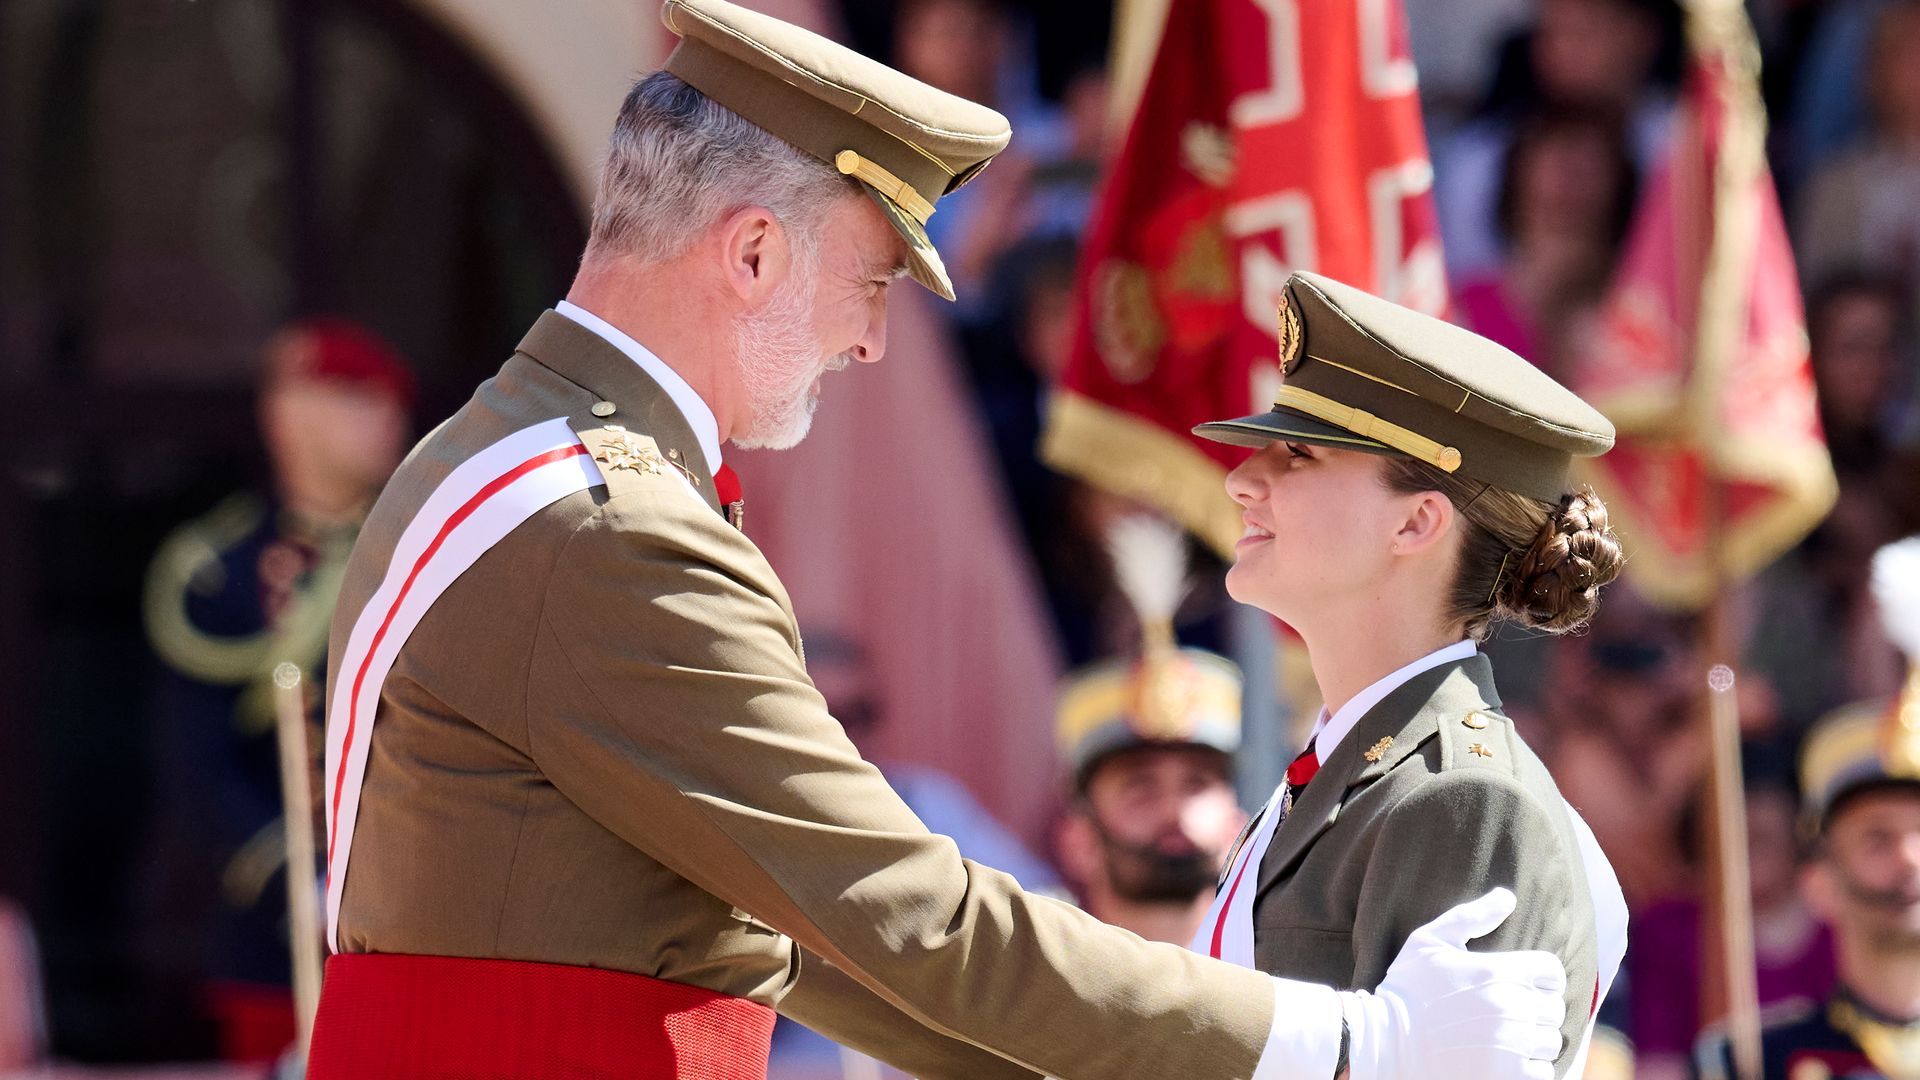 Princess Leonor shares sweet moment with dad King Felipe at ceremony: Watch